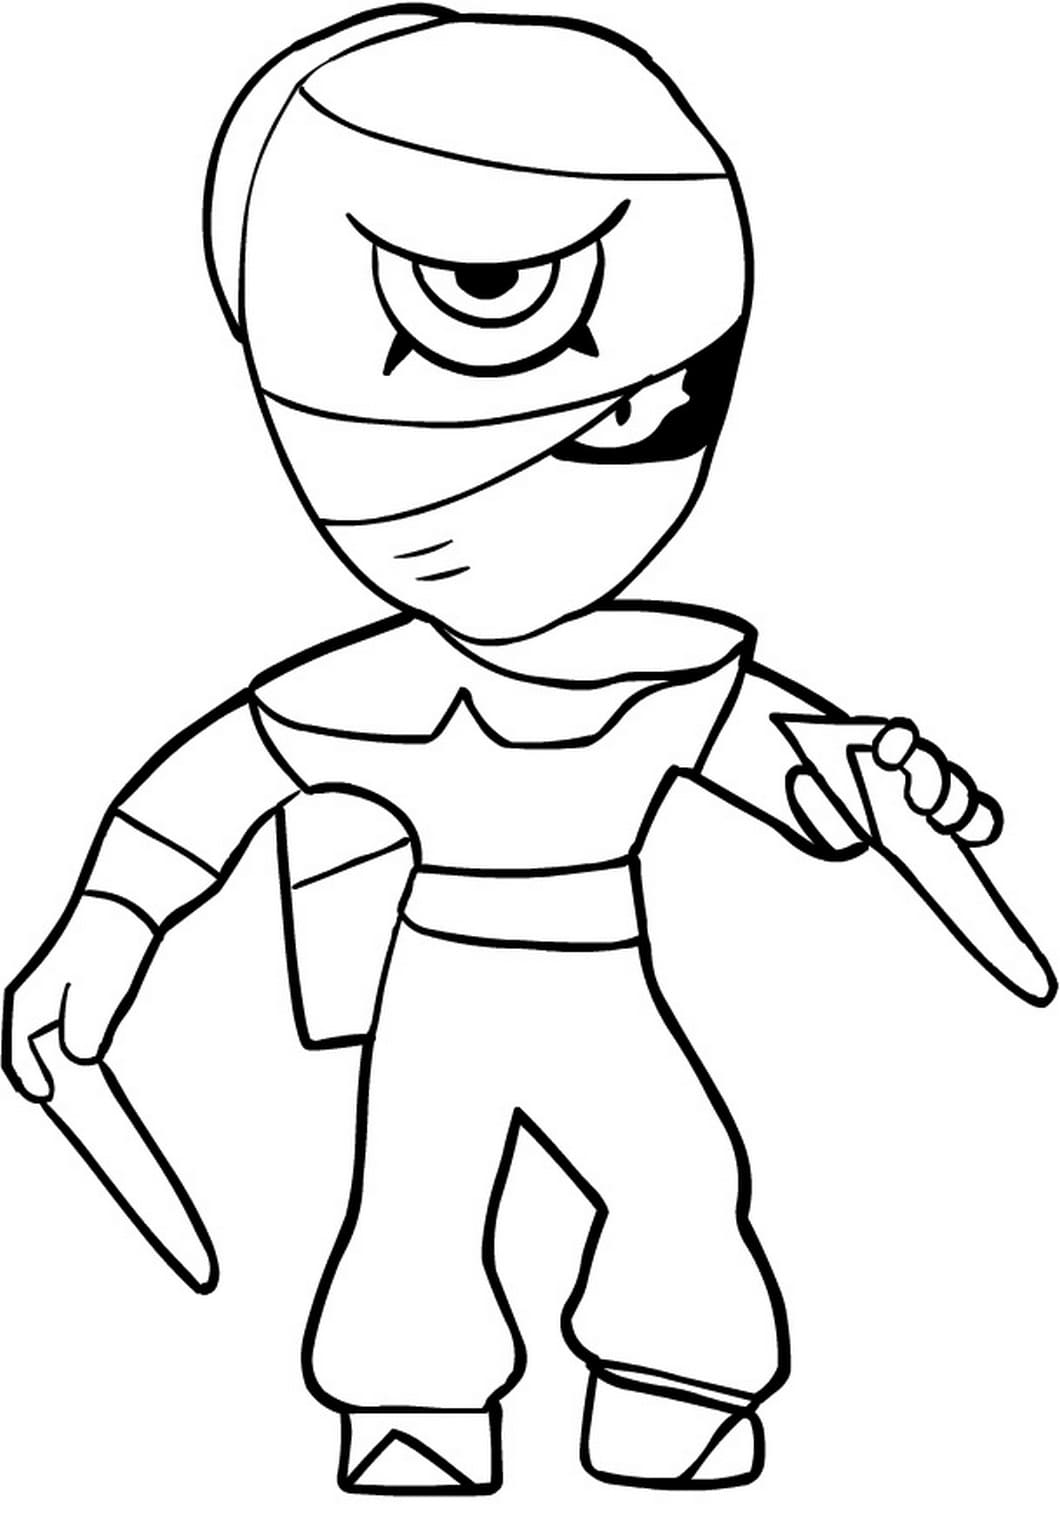 Free Tara from Brawl Stars Coloring Pages printable